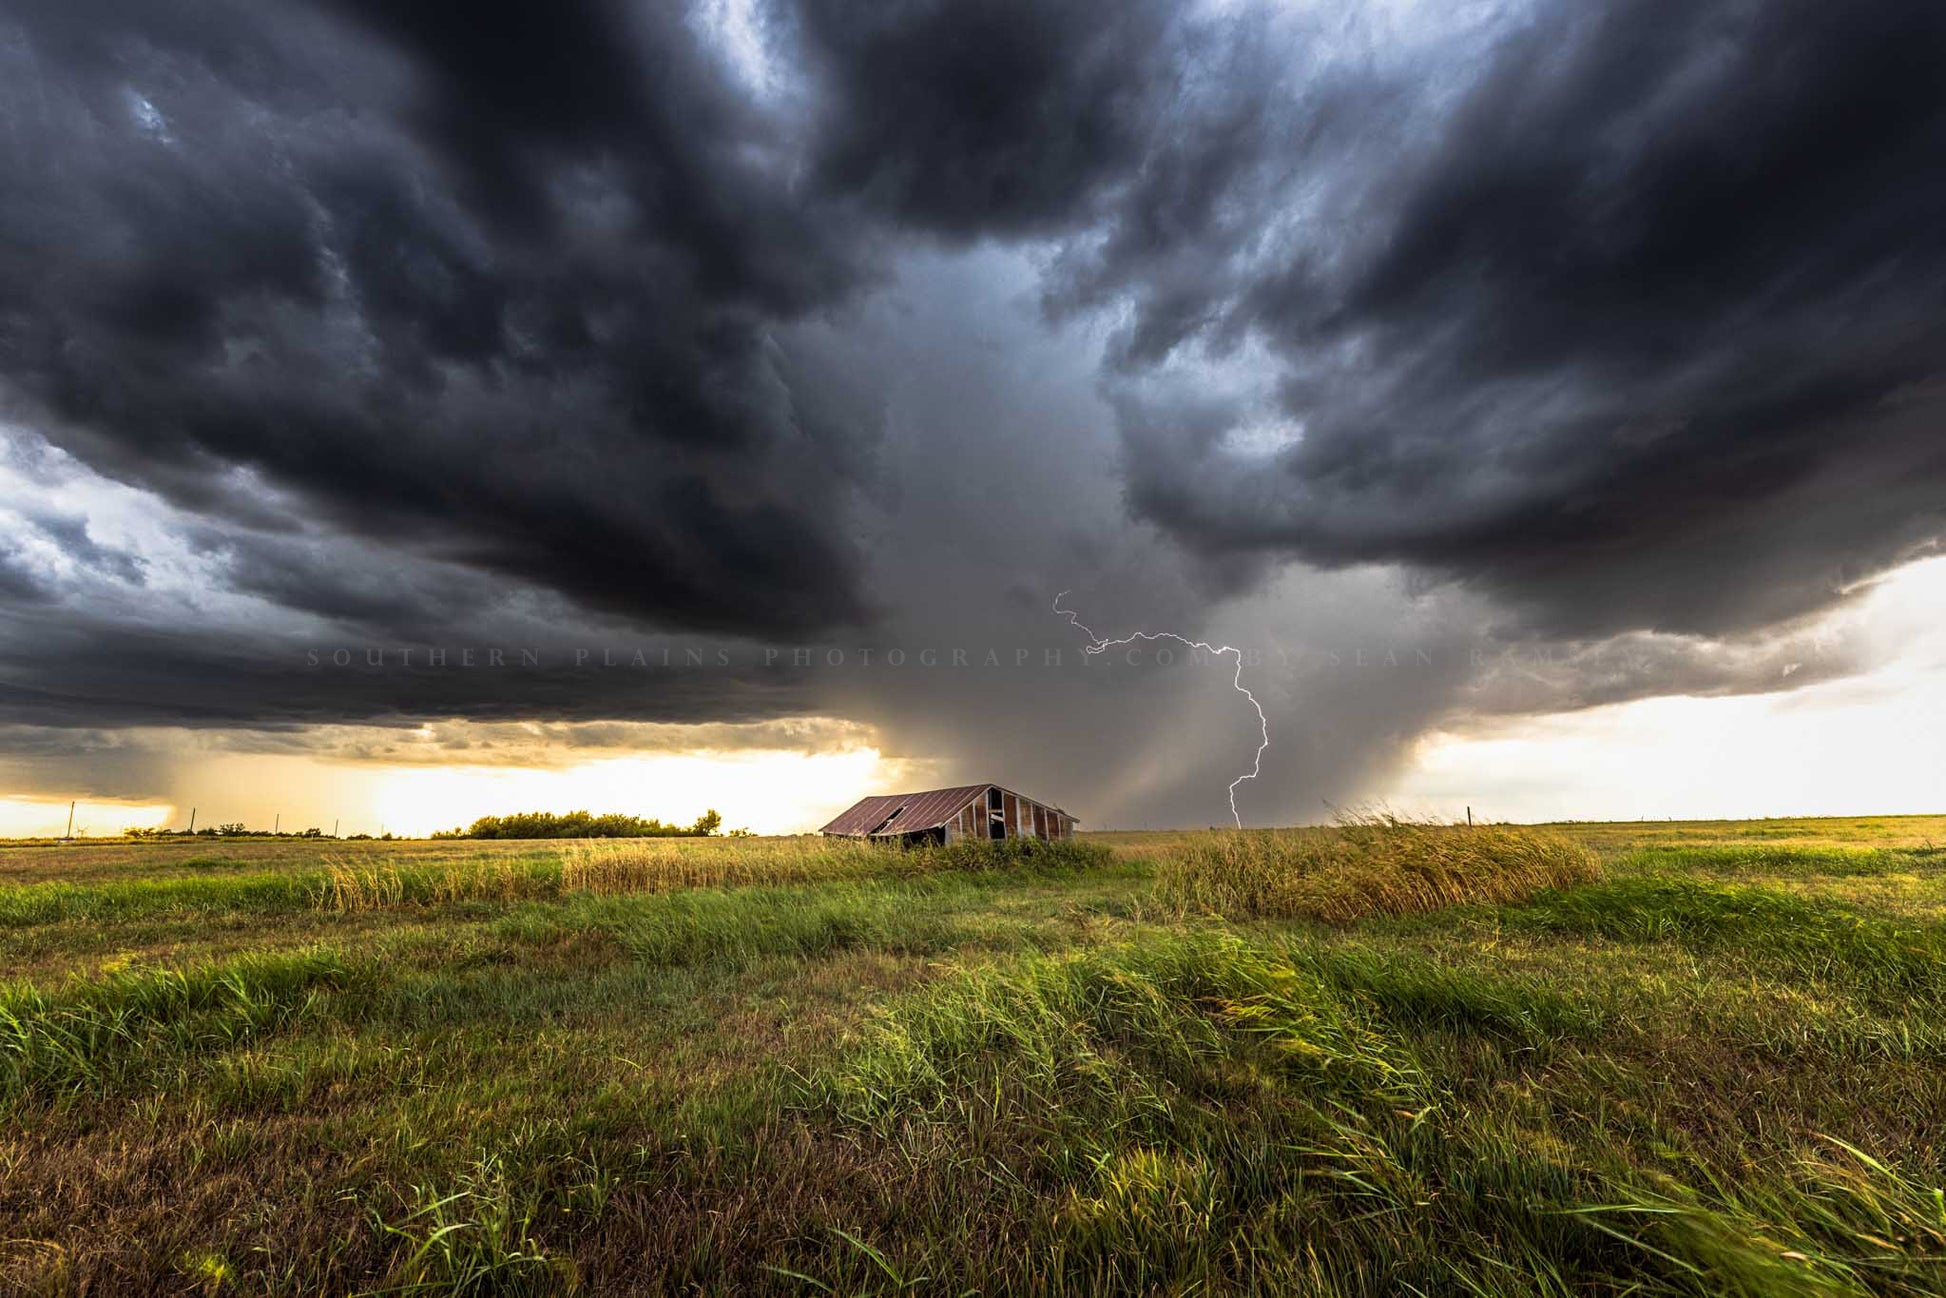 Storm photography print of lightning striking behind a tin covered barn during a summer thunderstorm in Oklahoma by Sean Ramsey of Southern Plains Photography.